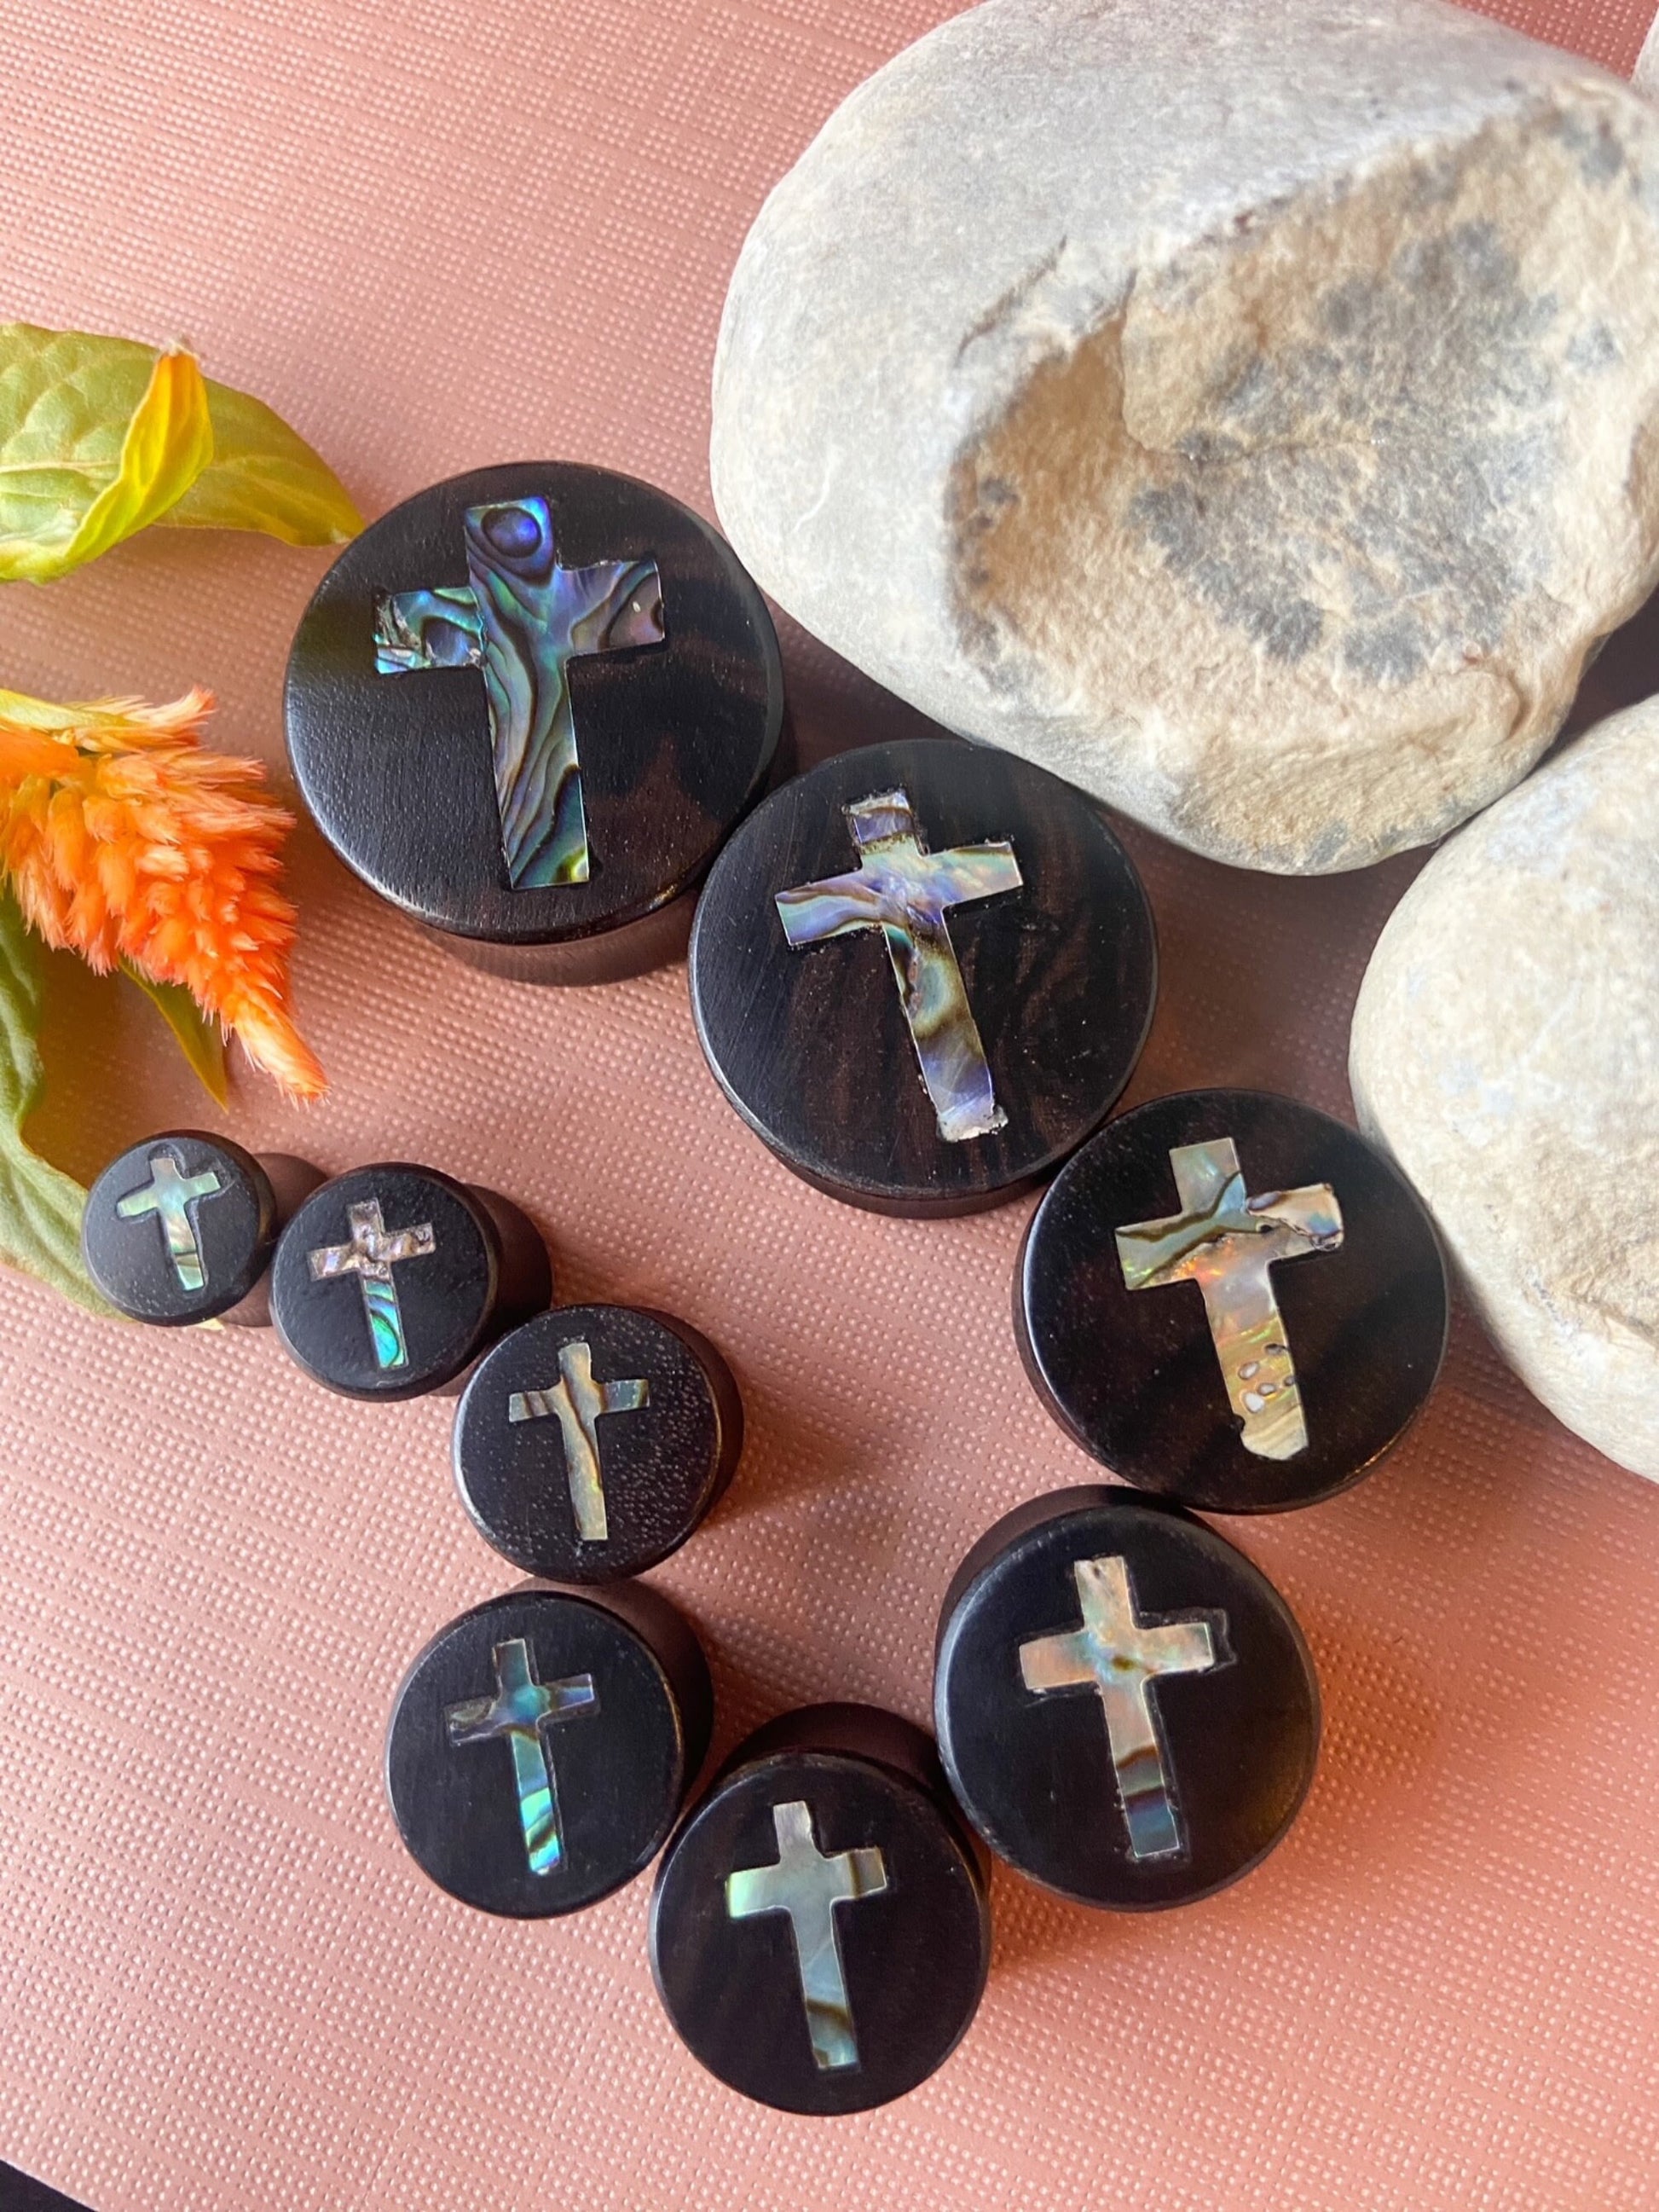 PAIR of Stunning Abalone Shell Cross Inlay Black Wood Saddle Plugs/Tunnels - Gauges 0g (8mm) thru 1" (25mm) available!